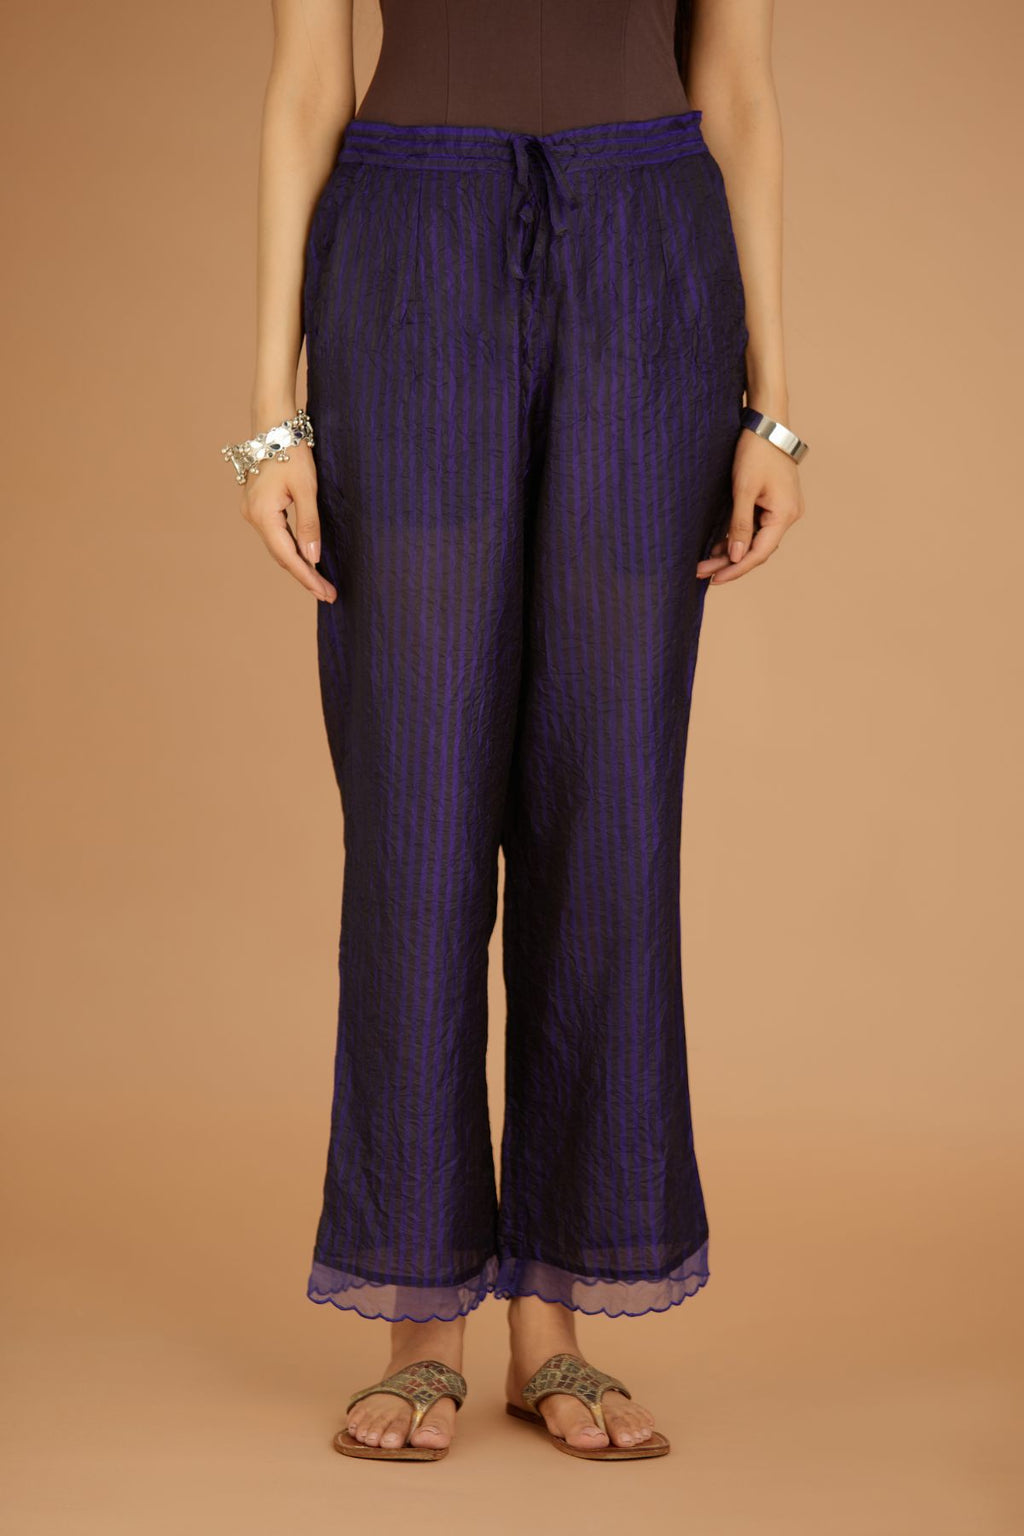 Blue hand crushed silk pants with hand block print fine stripes and organza fabric and embroidery detail at bottom hem.